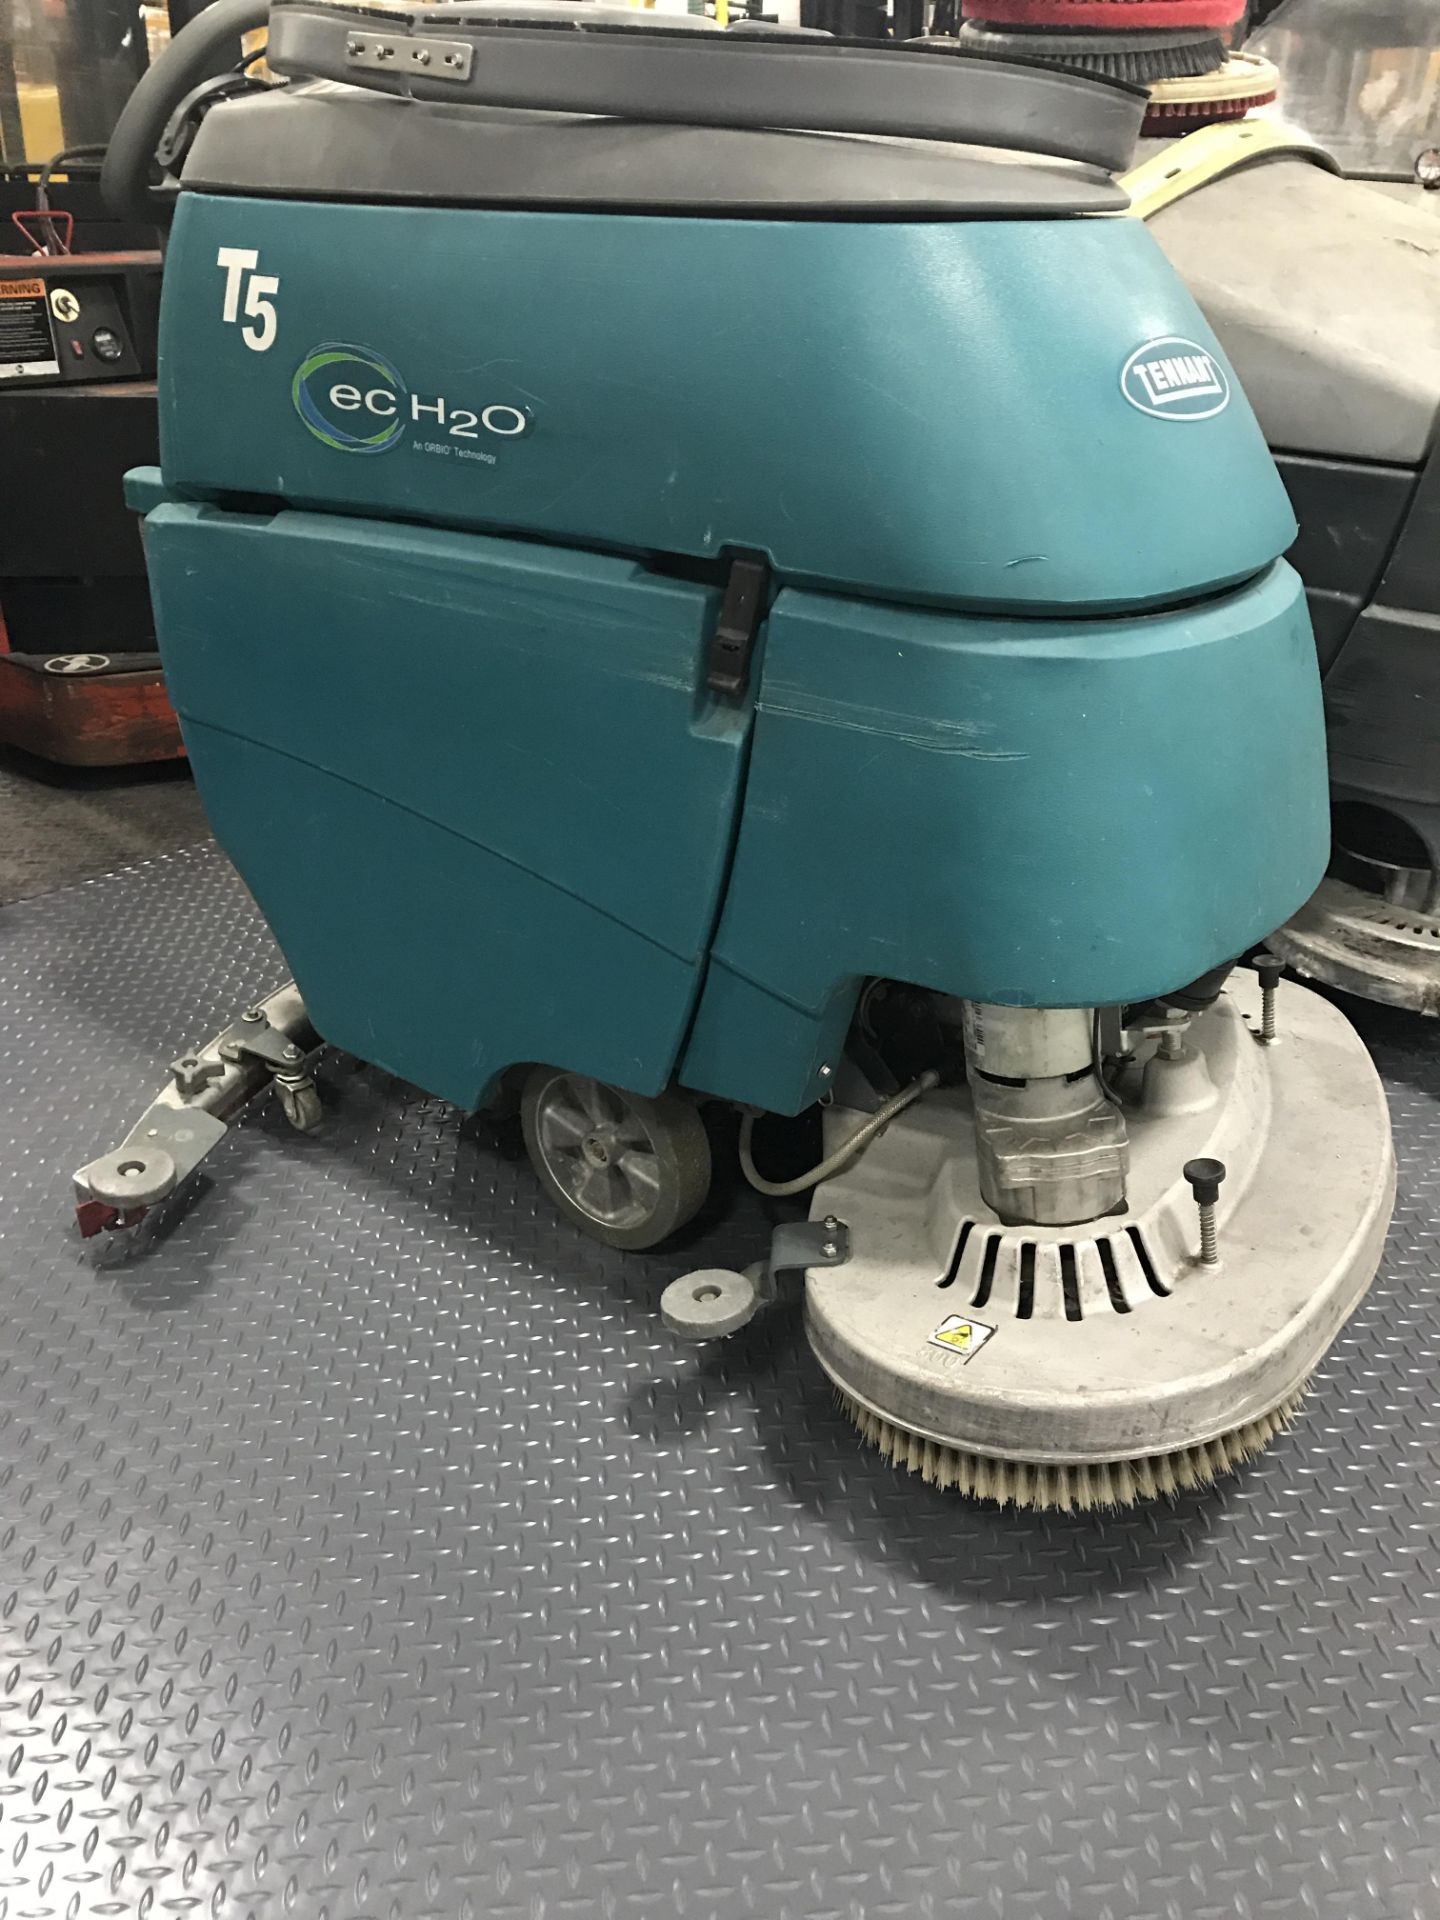 TENNANT T5 FLOOR SWEEPER/SCRUBBER, ECO H20, 780 HOURS SHOWING.